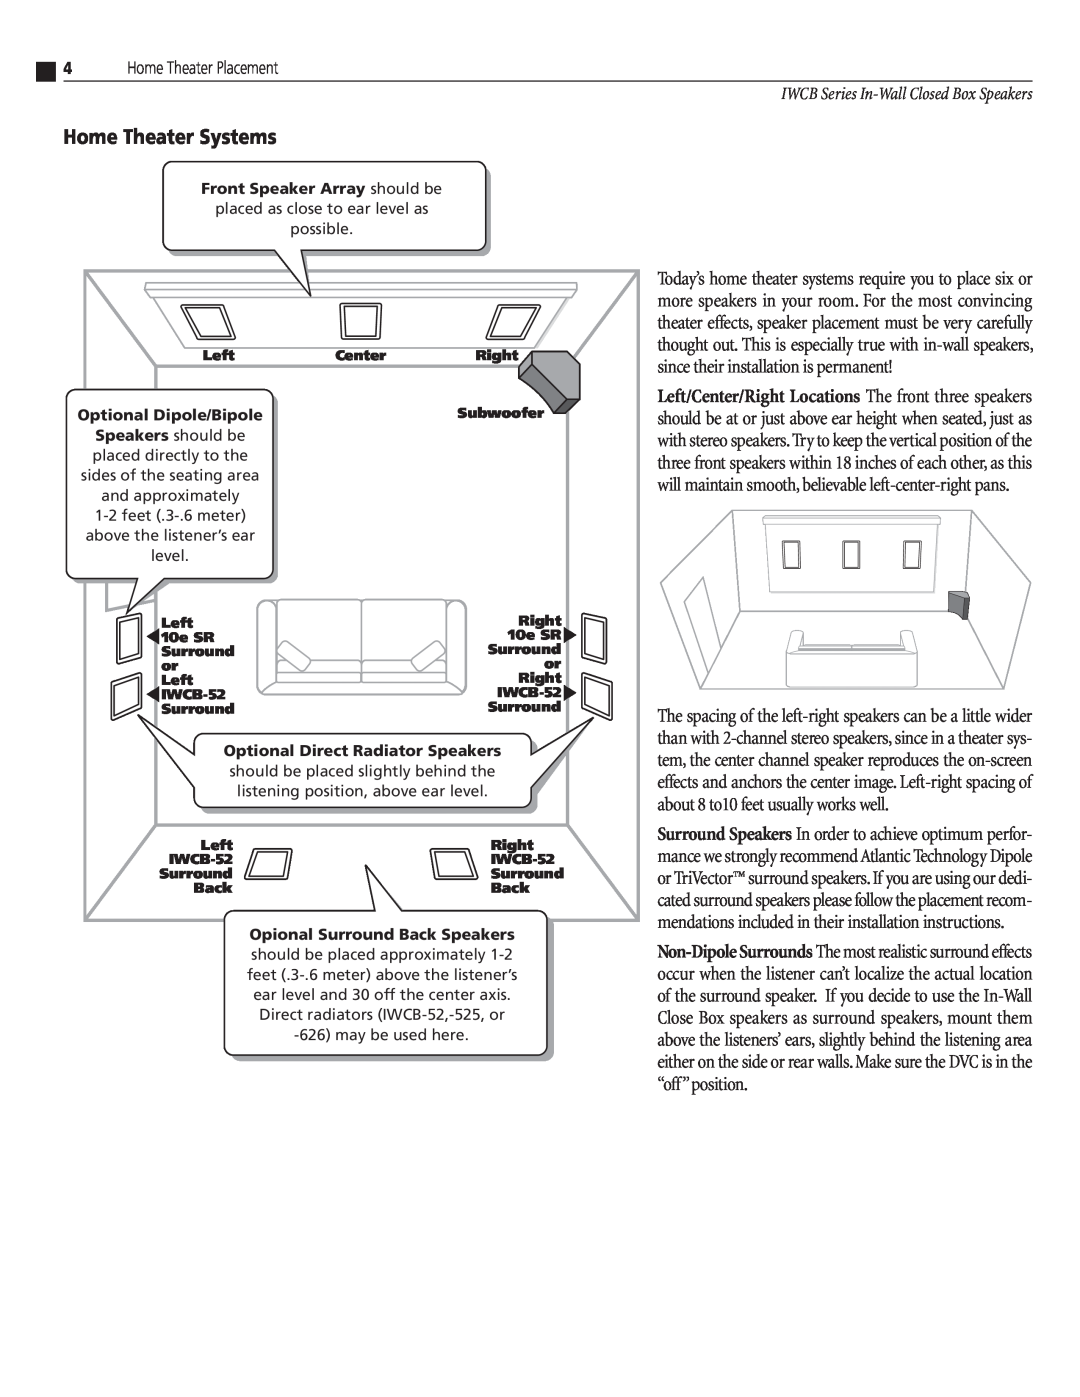 Atlantic Technology IWCB-525, IWCB-626 instruction manual Home Theater Systems, since their installation is permanent 